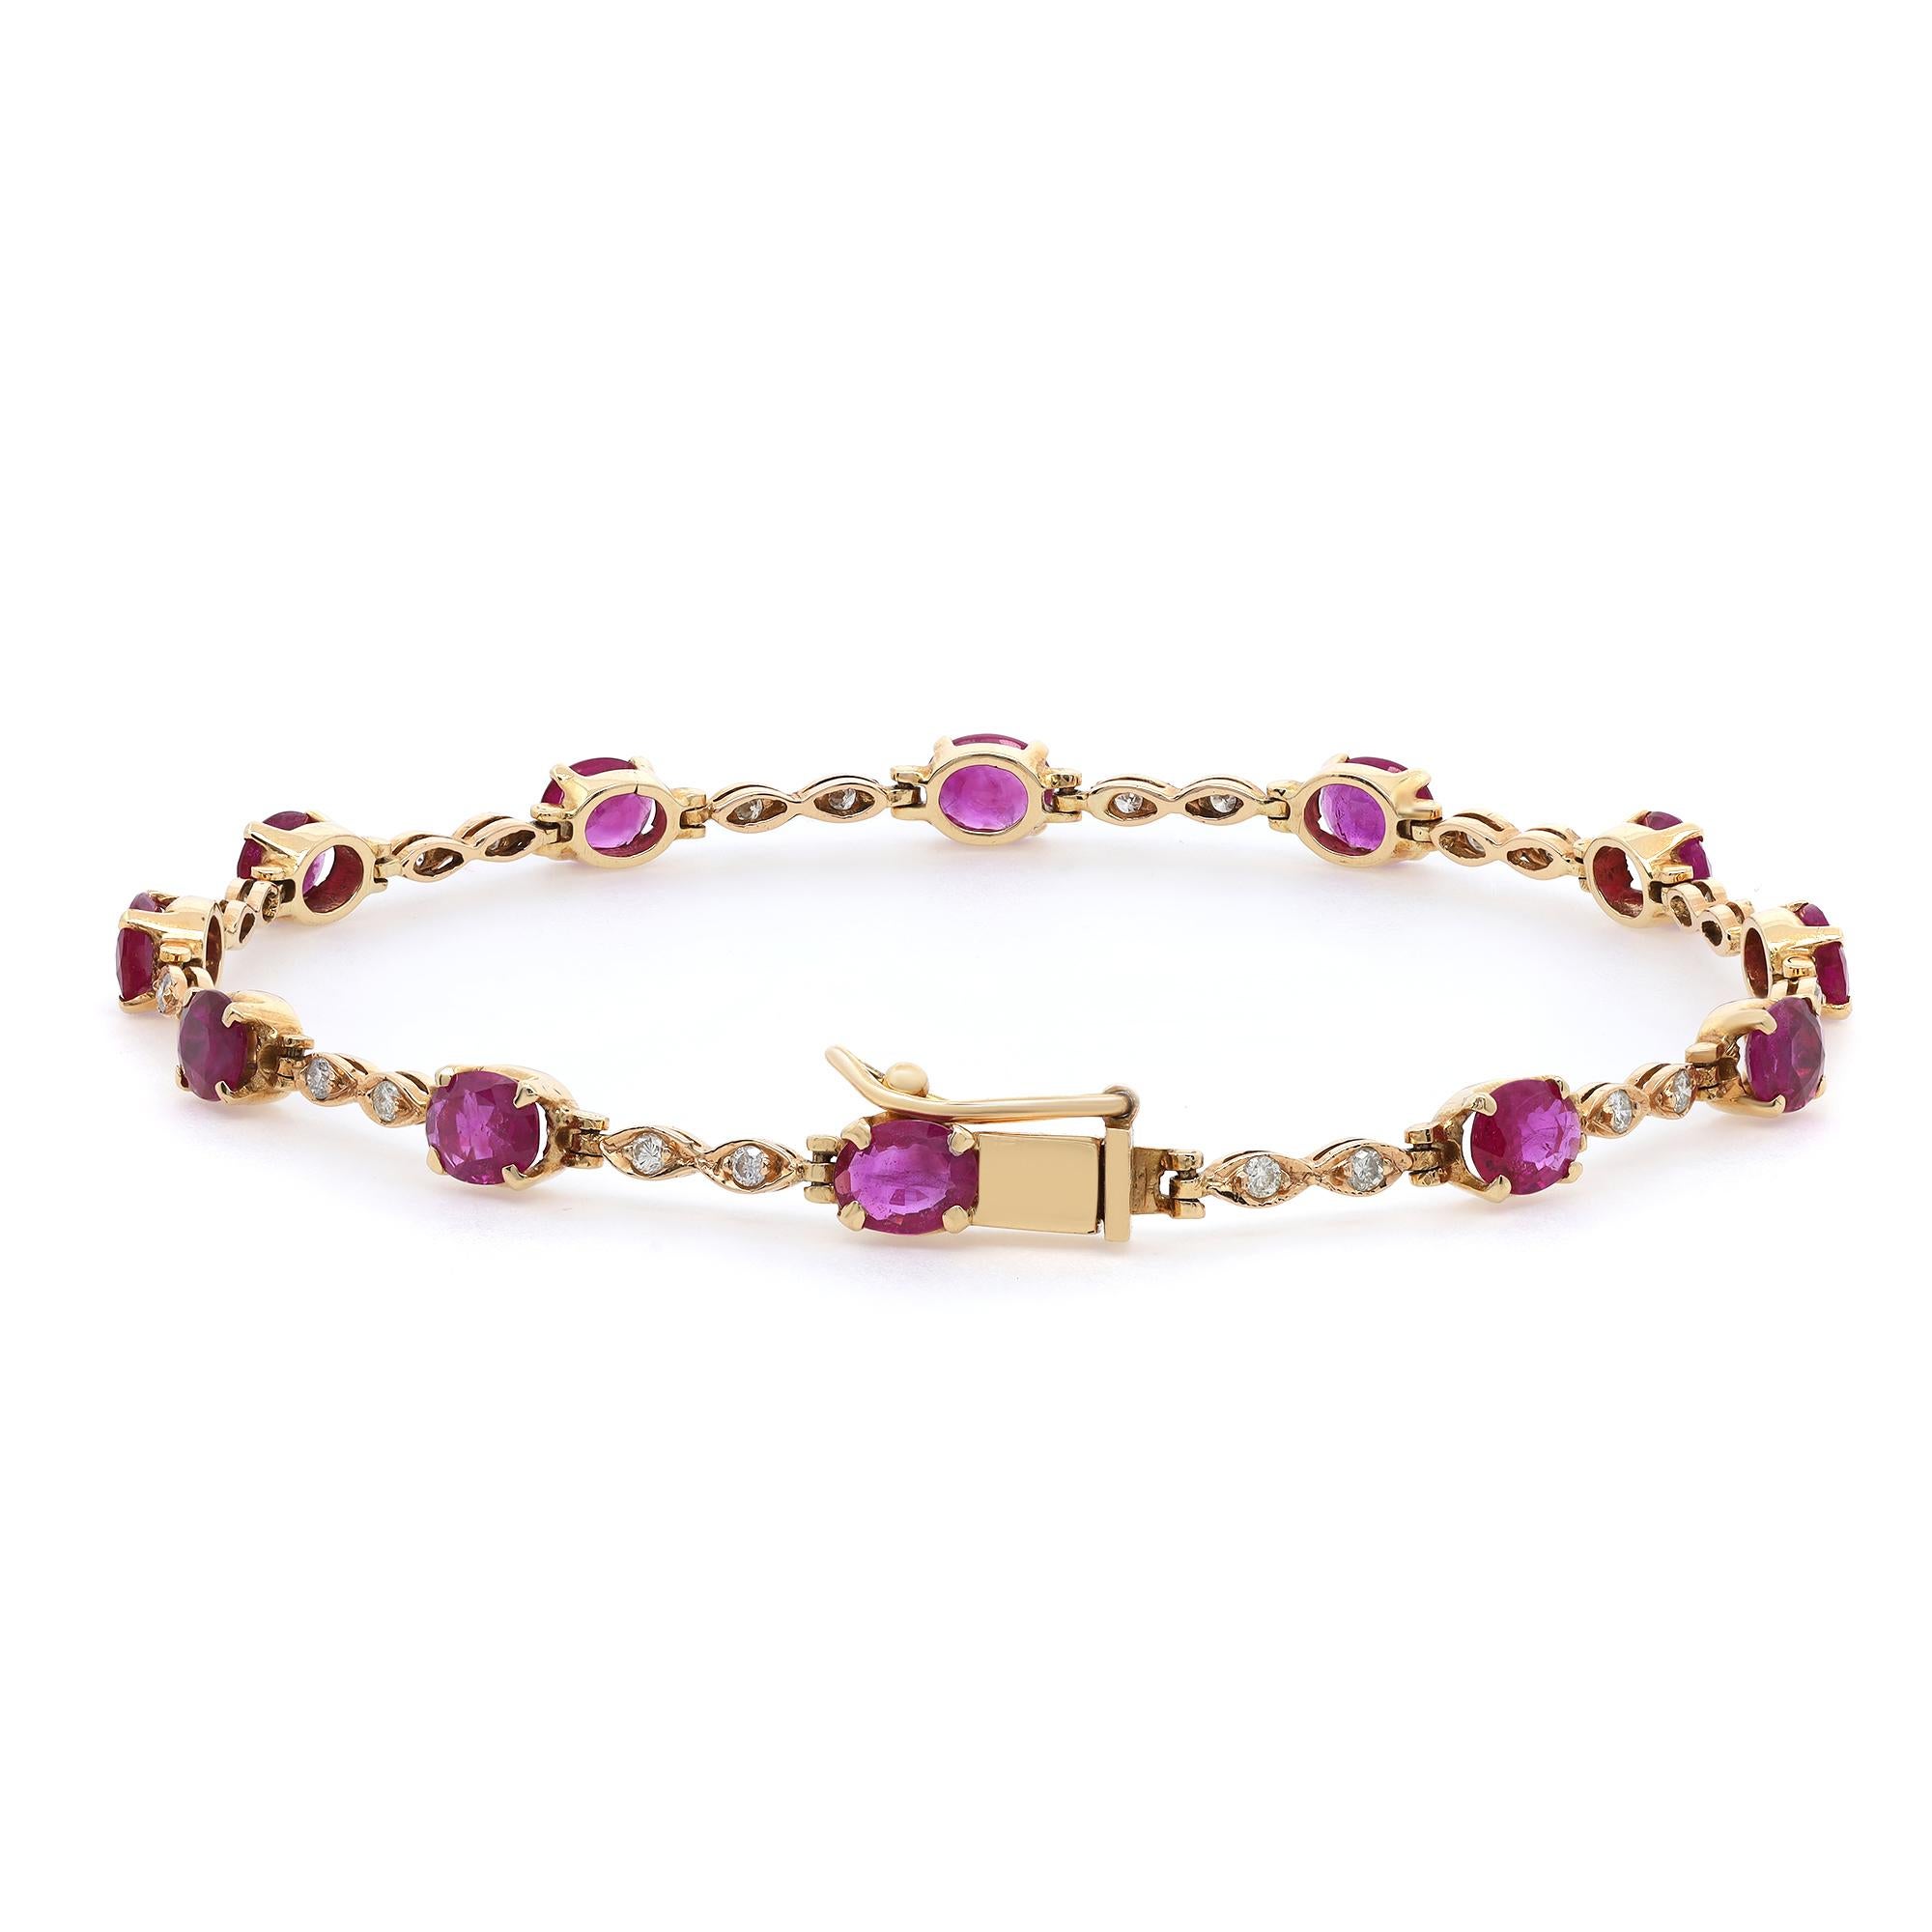 This beautifully crafted bracelet features 12 oval shaped deep red Rubies and 24 round brilliant cut diamonds encrusted in four prong setting. Crafted in 18k yellow gold. Wrist size: 7.5 inches. Width: 4mm. Total weight: 6.17 grams. Bracelet closes